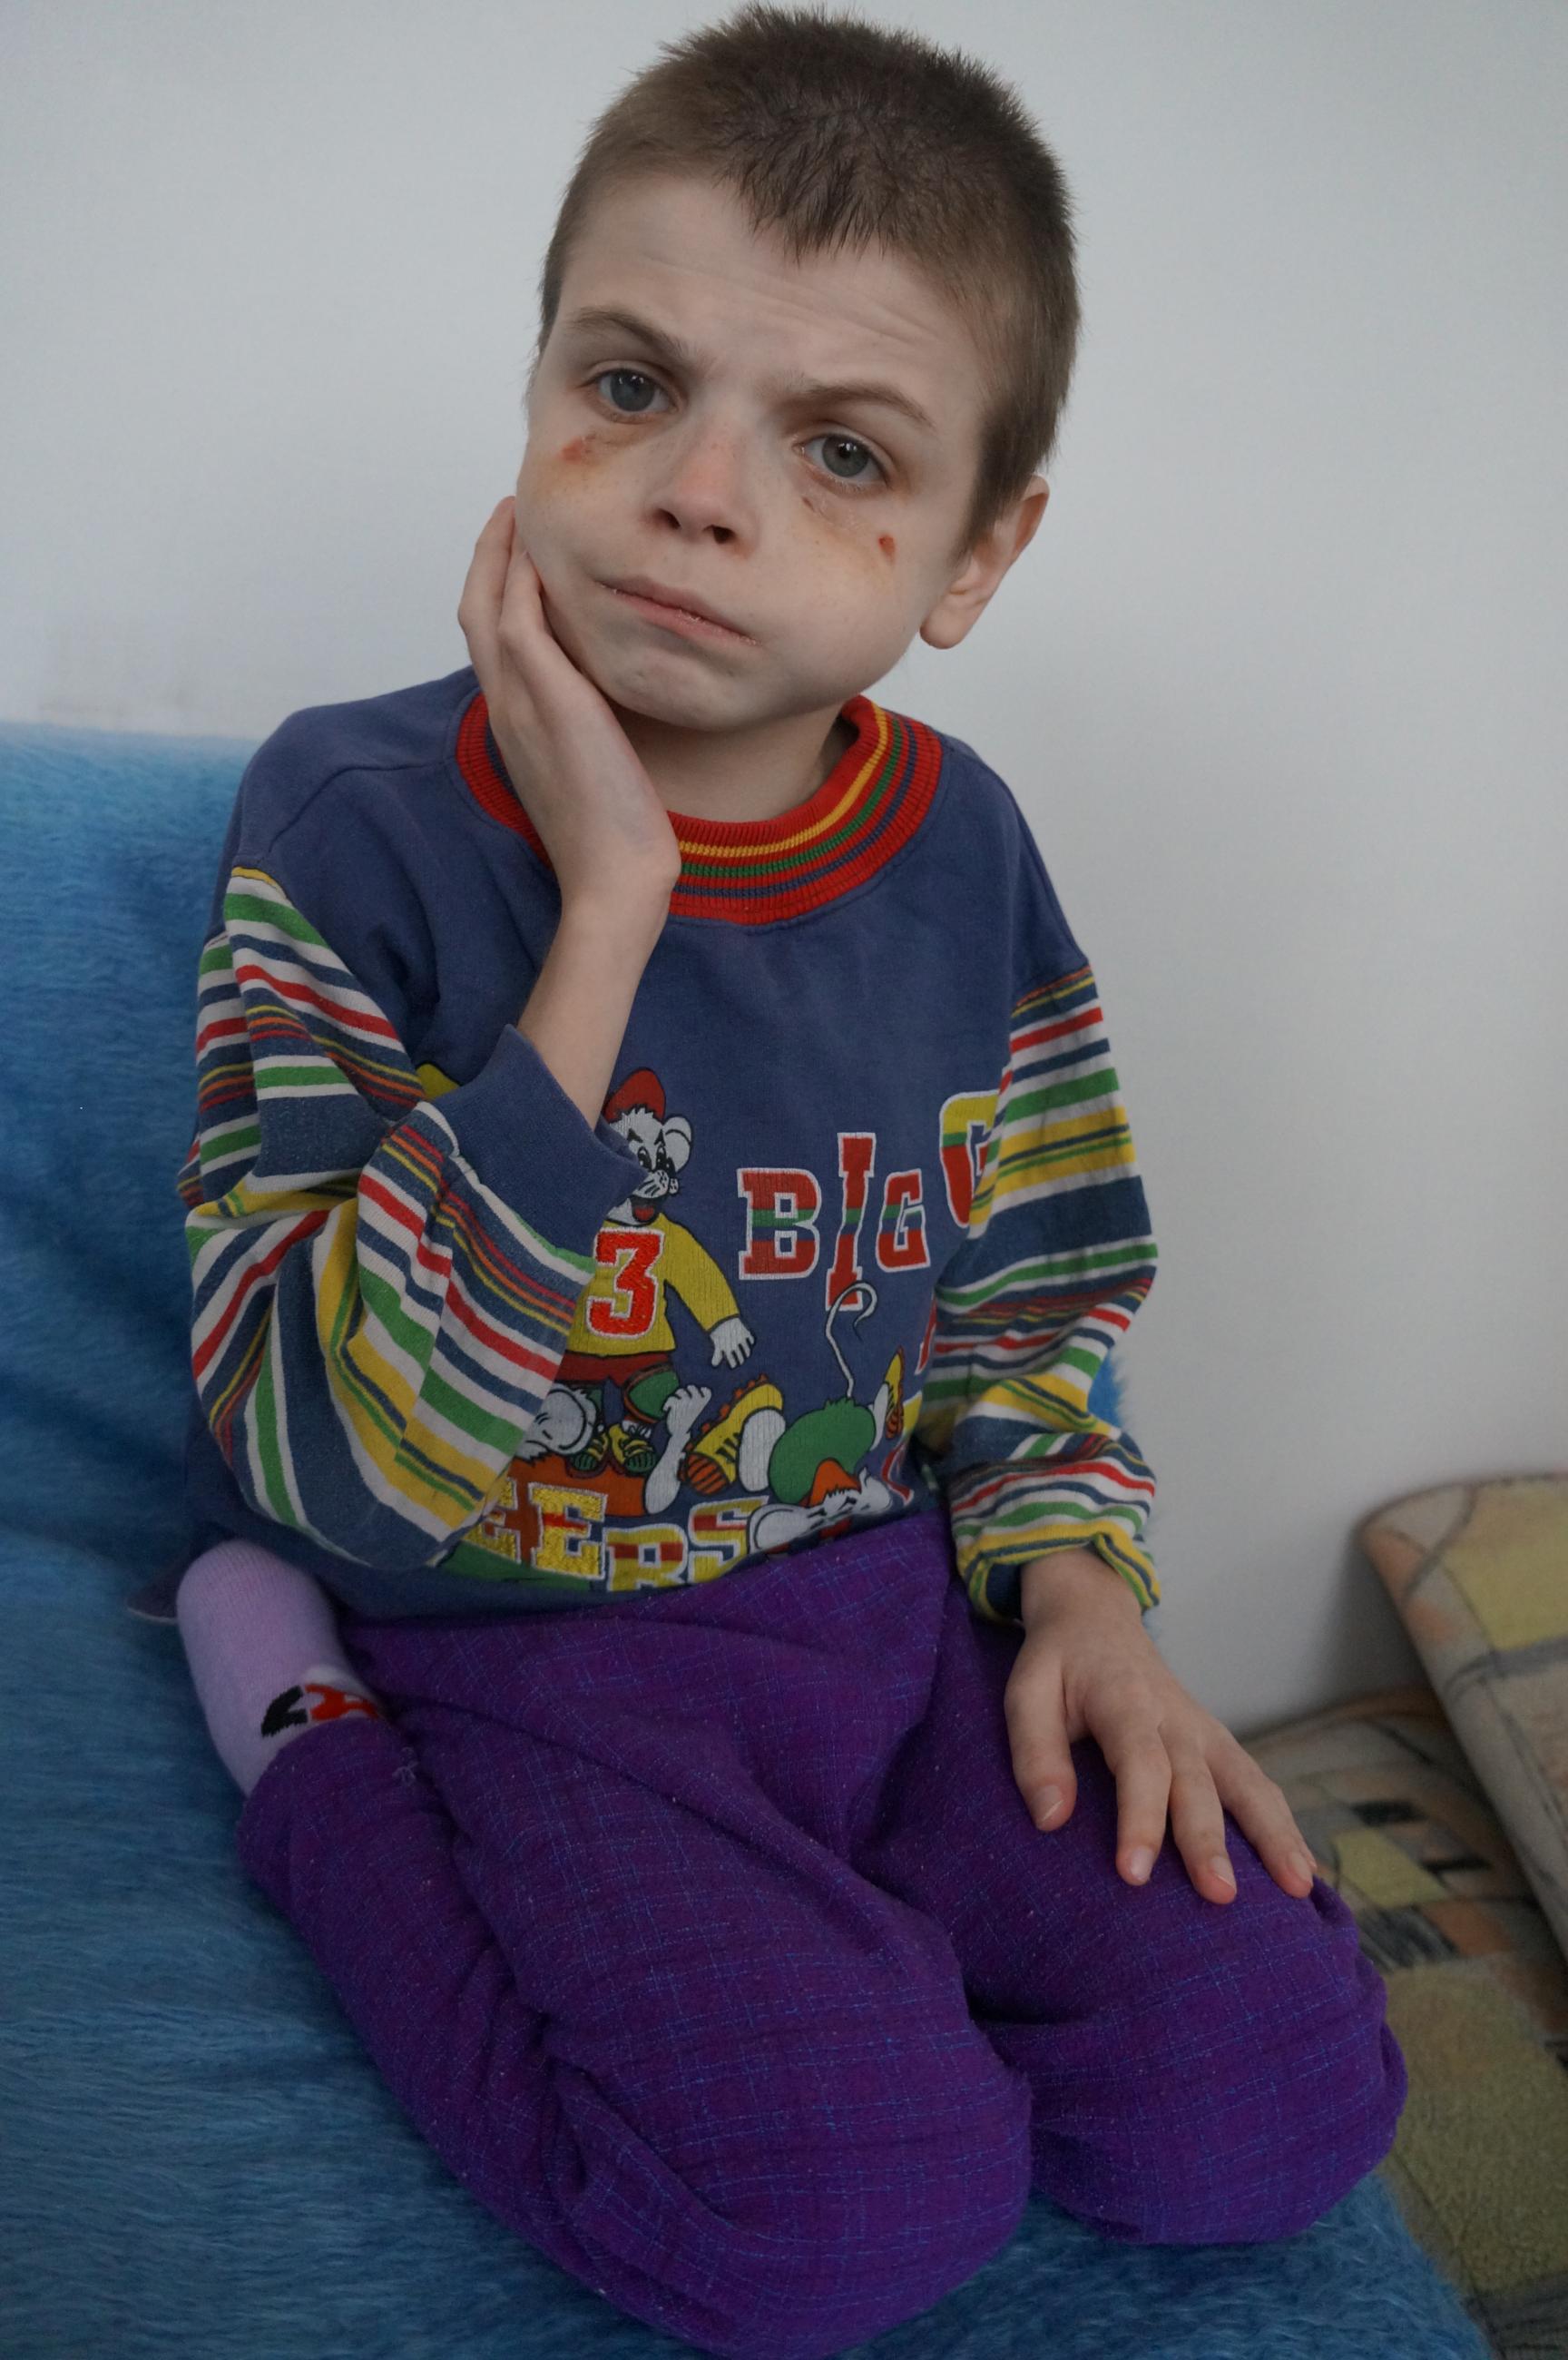 Child with bruised eyes sitting on couch looking into the camera